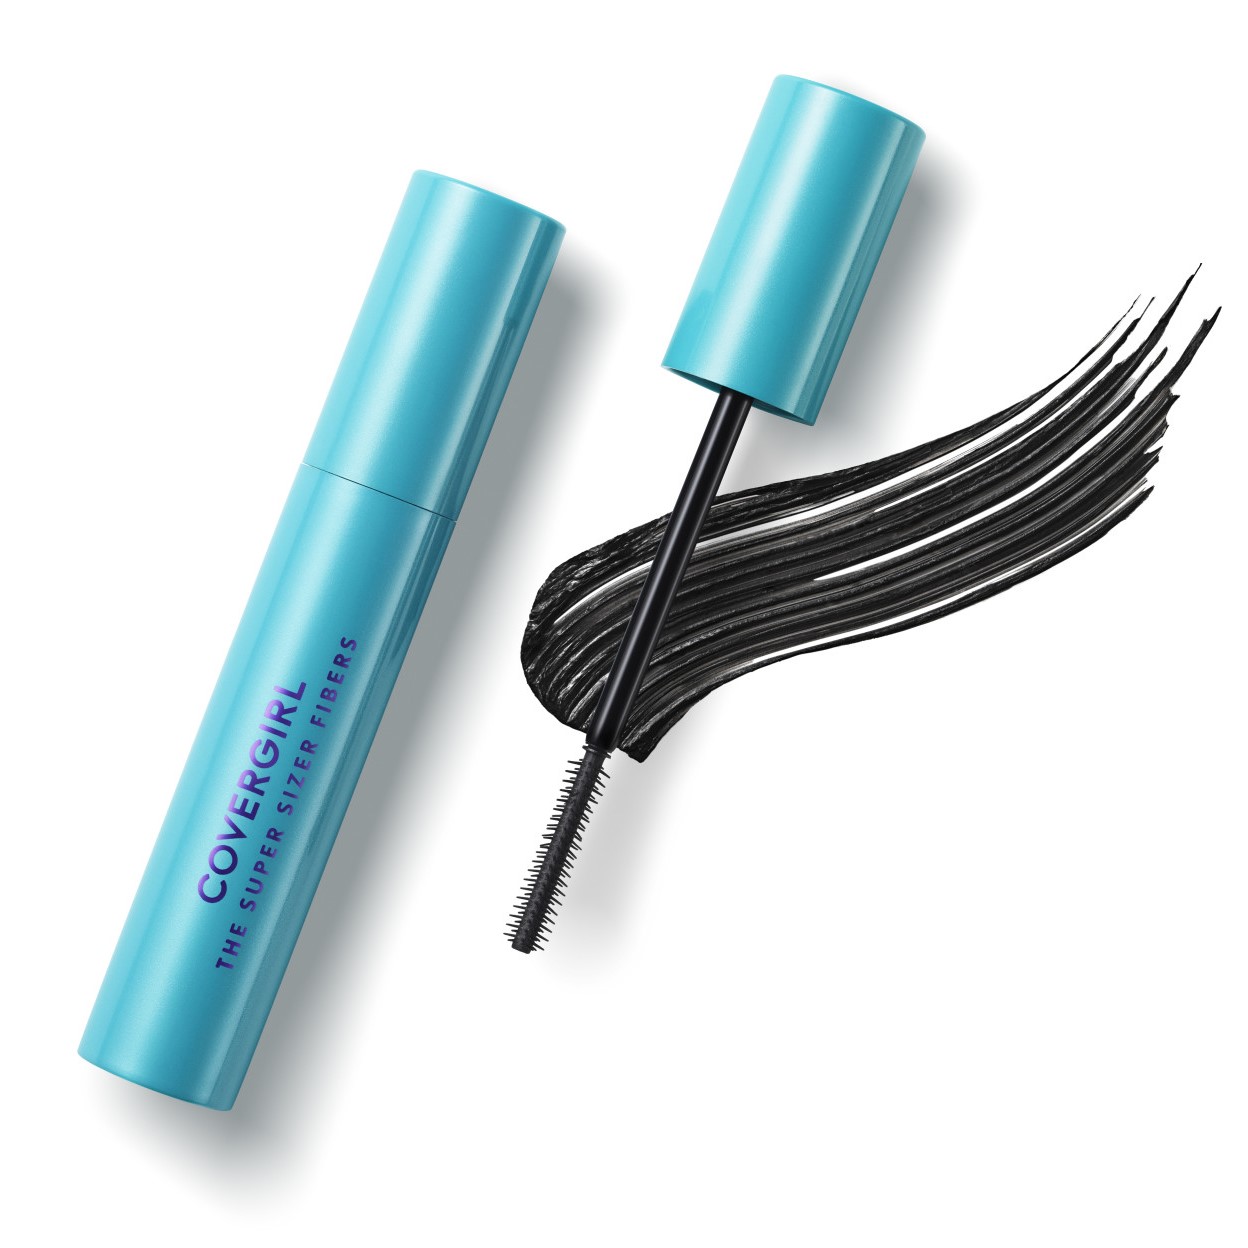 COVERGIRL The Super Sizer Fibers Mascara, 800 Very Black - image 5 of 8